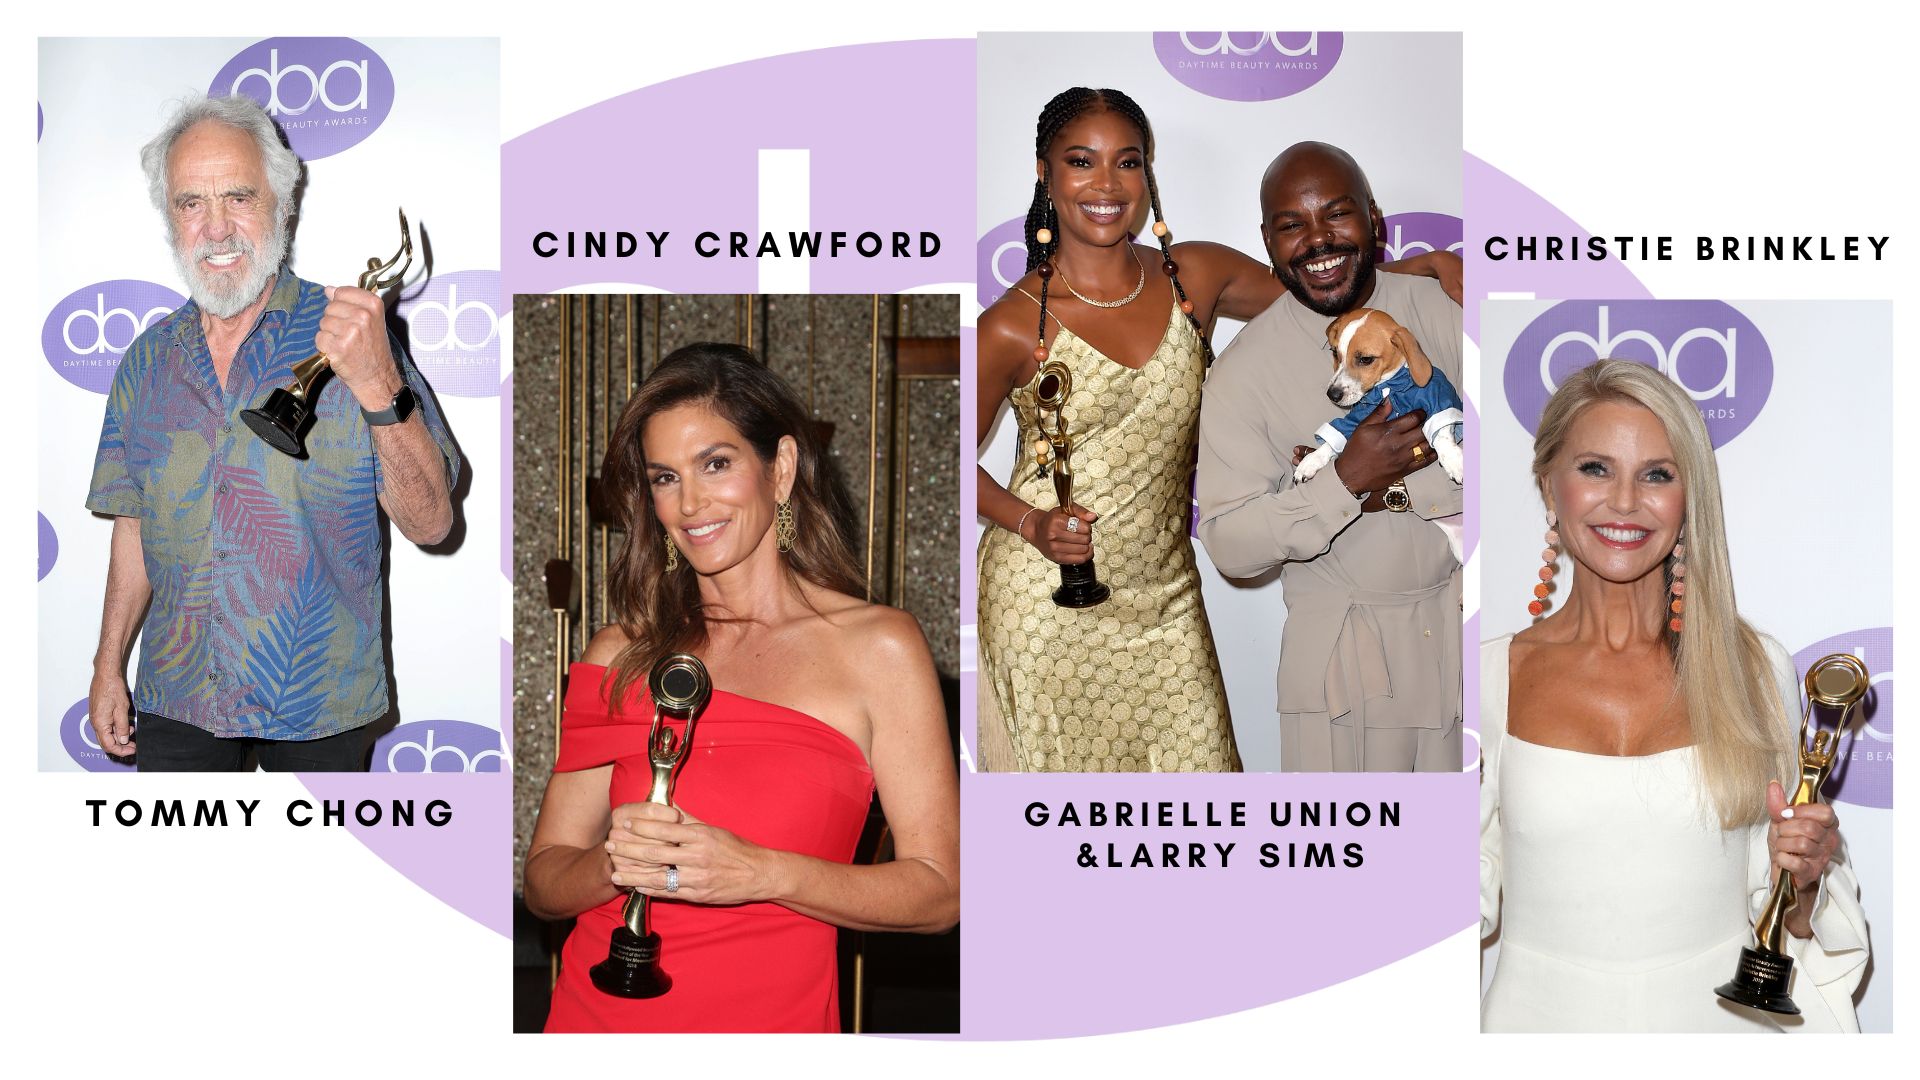 daytime beauty awards, tommy chong, cindy crawford, gabrielle union, christie brinkley